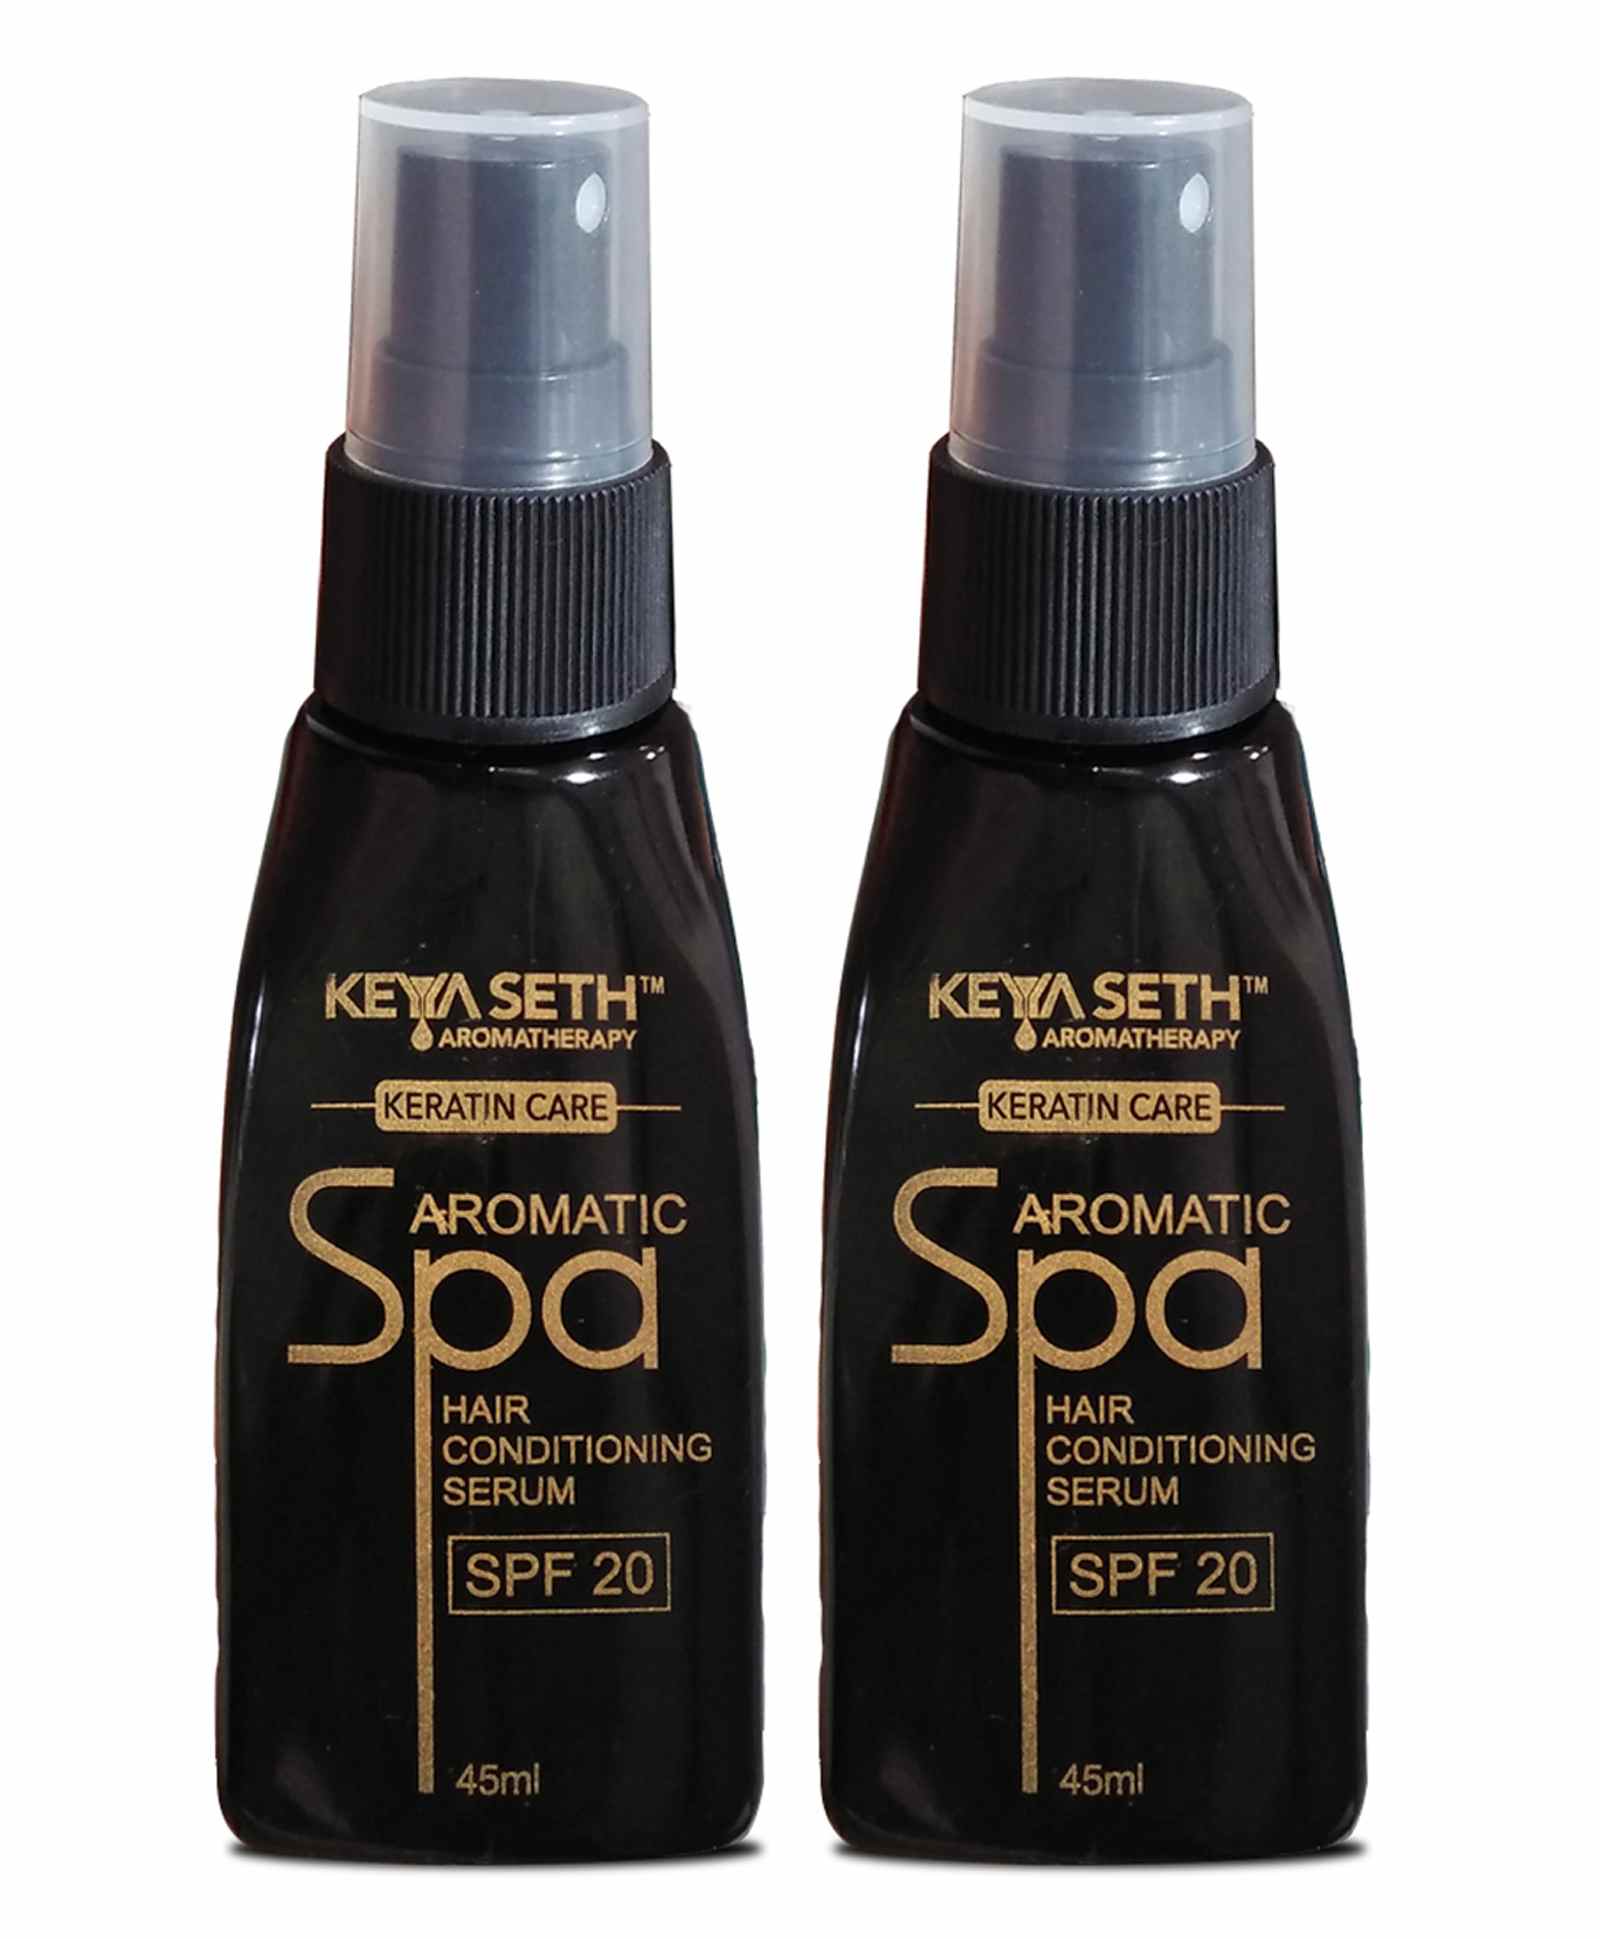 Keya Seth Aromatherapy Spa Hair Conditioning Serum with Keratin Care SPF 20  - 45 ml each Online in India, Buy at Best Price from  - 9277035